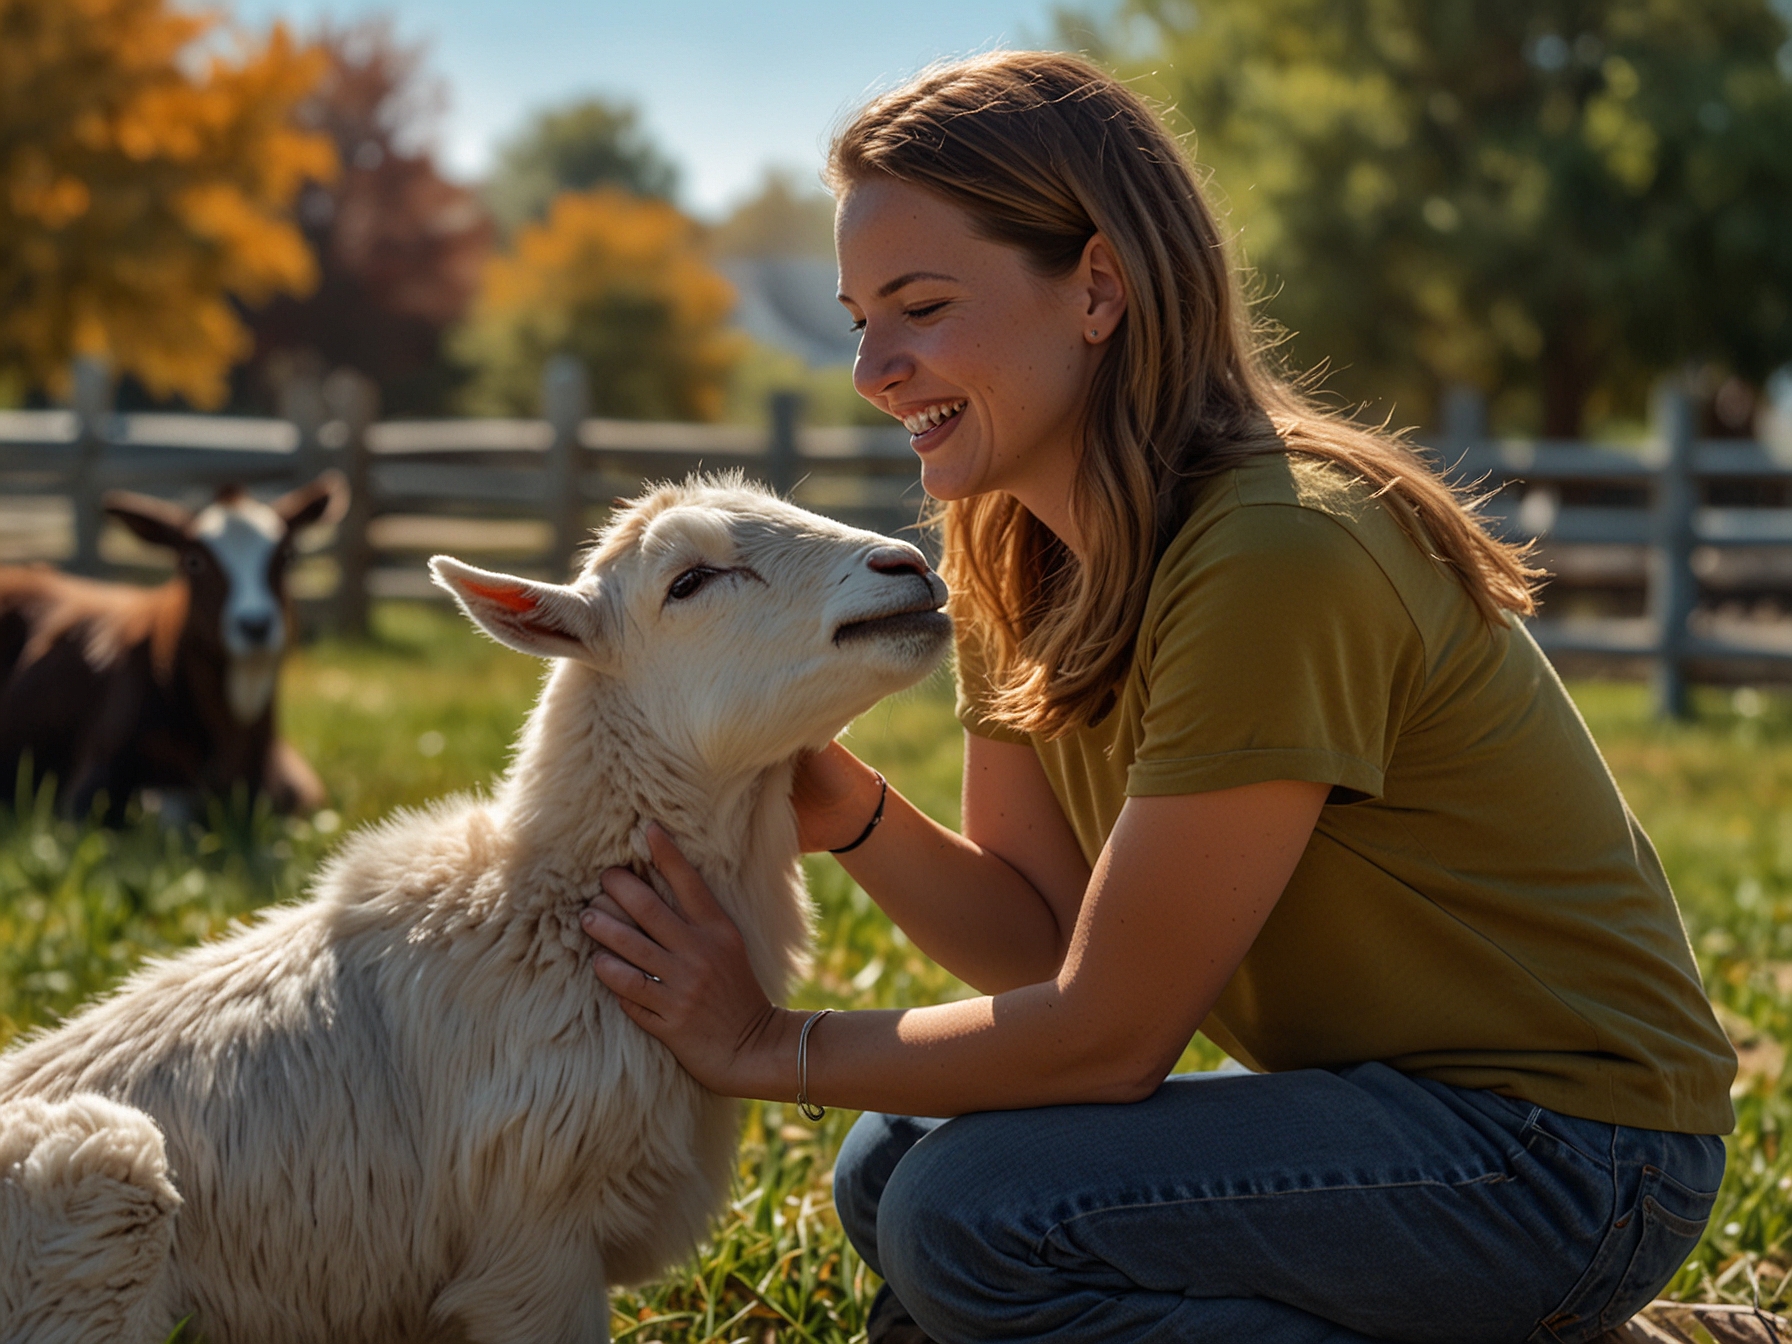 Autumn Swanton laughs as she pets a friendly goat at Cajun Corral Farm's 'Picnic with Goats' event on a sunny day, surrounded by sprawling fields and picnicking families.